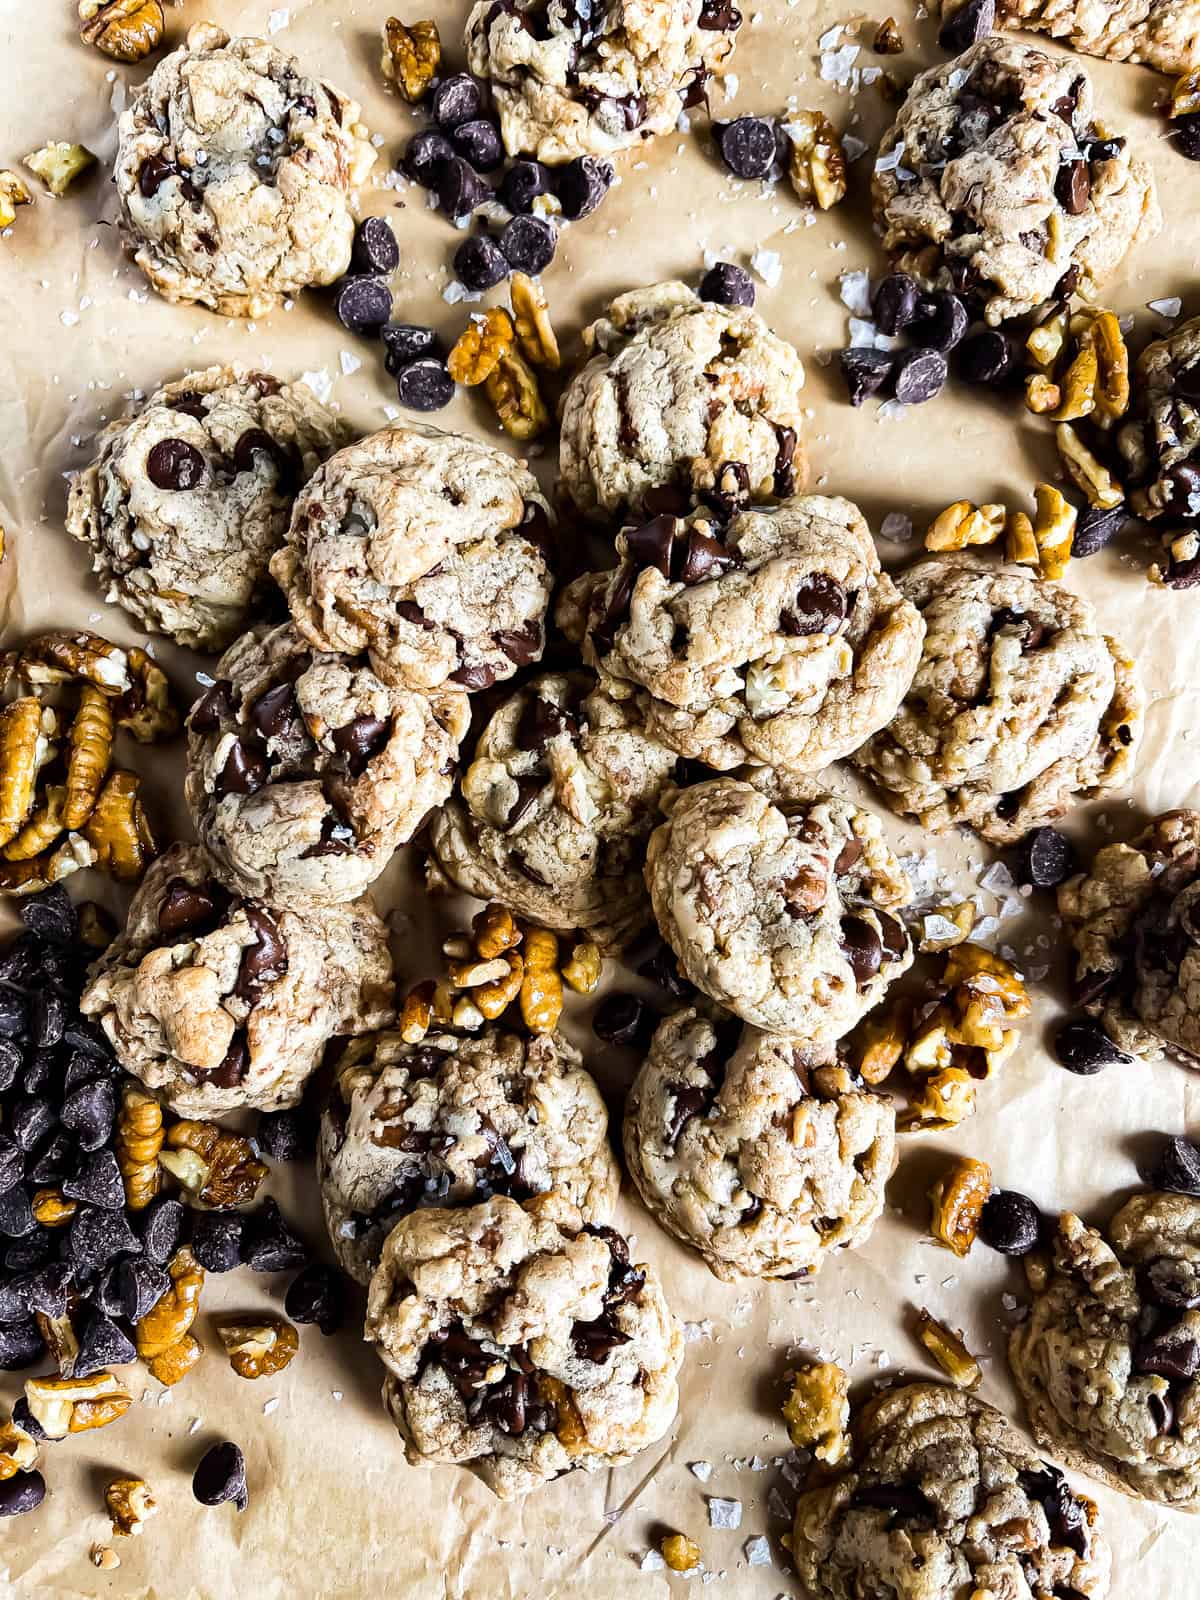 picture of a mound of brown butter chocolate chip cookies with extra pecan and choc chip garnishes - dessert portion of the super bowl recipe roundup